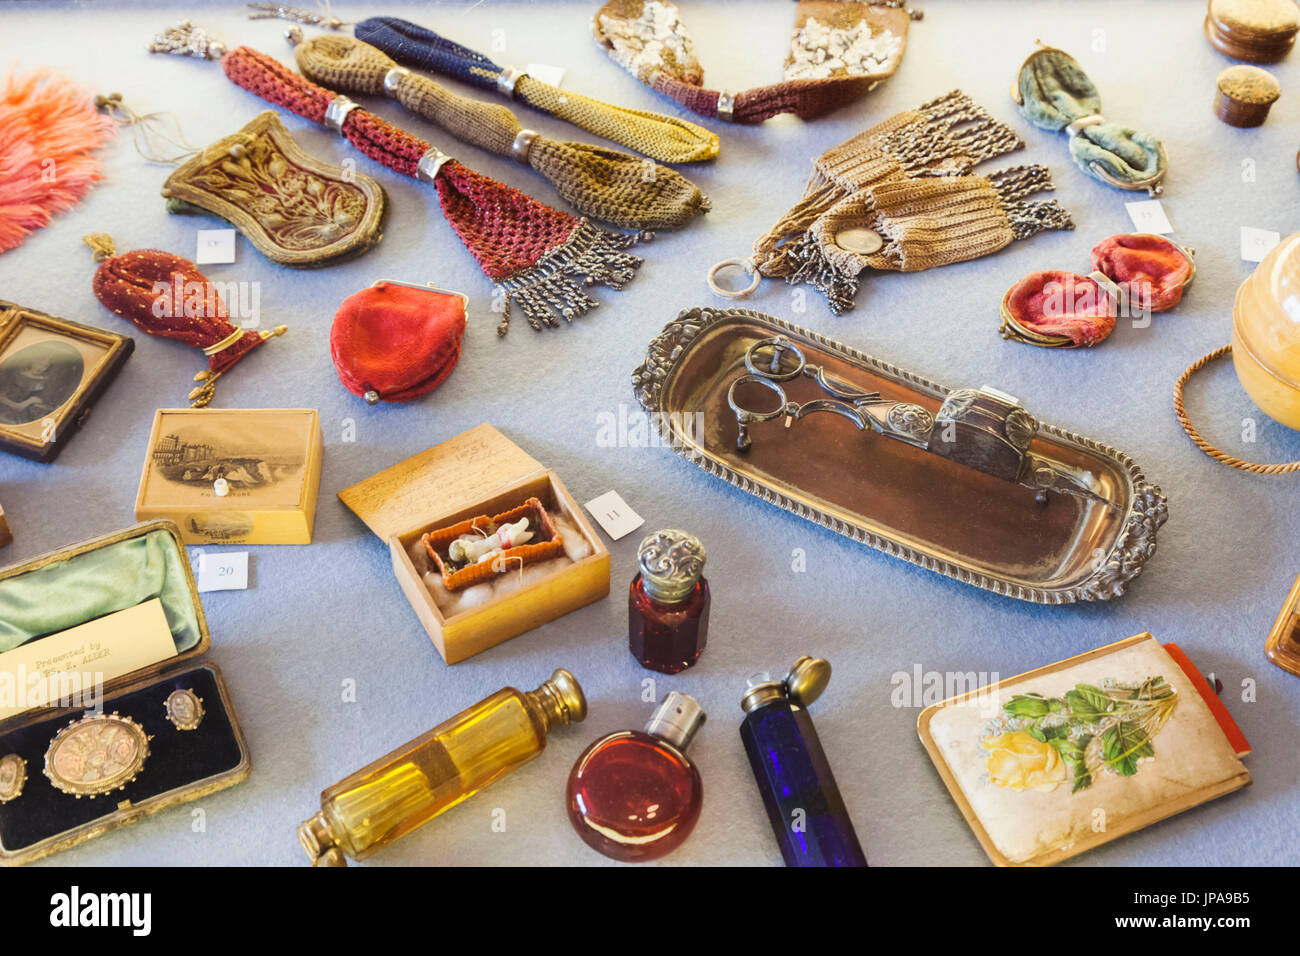 England, Kent, Broadstairs, Dickens House Museum, Display of Victorian Era Personal Items Stock Photo